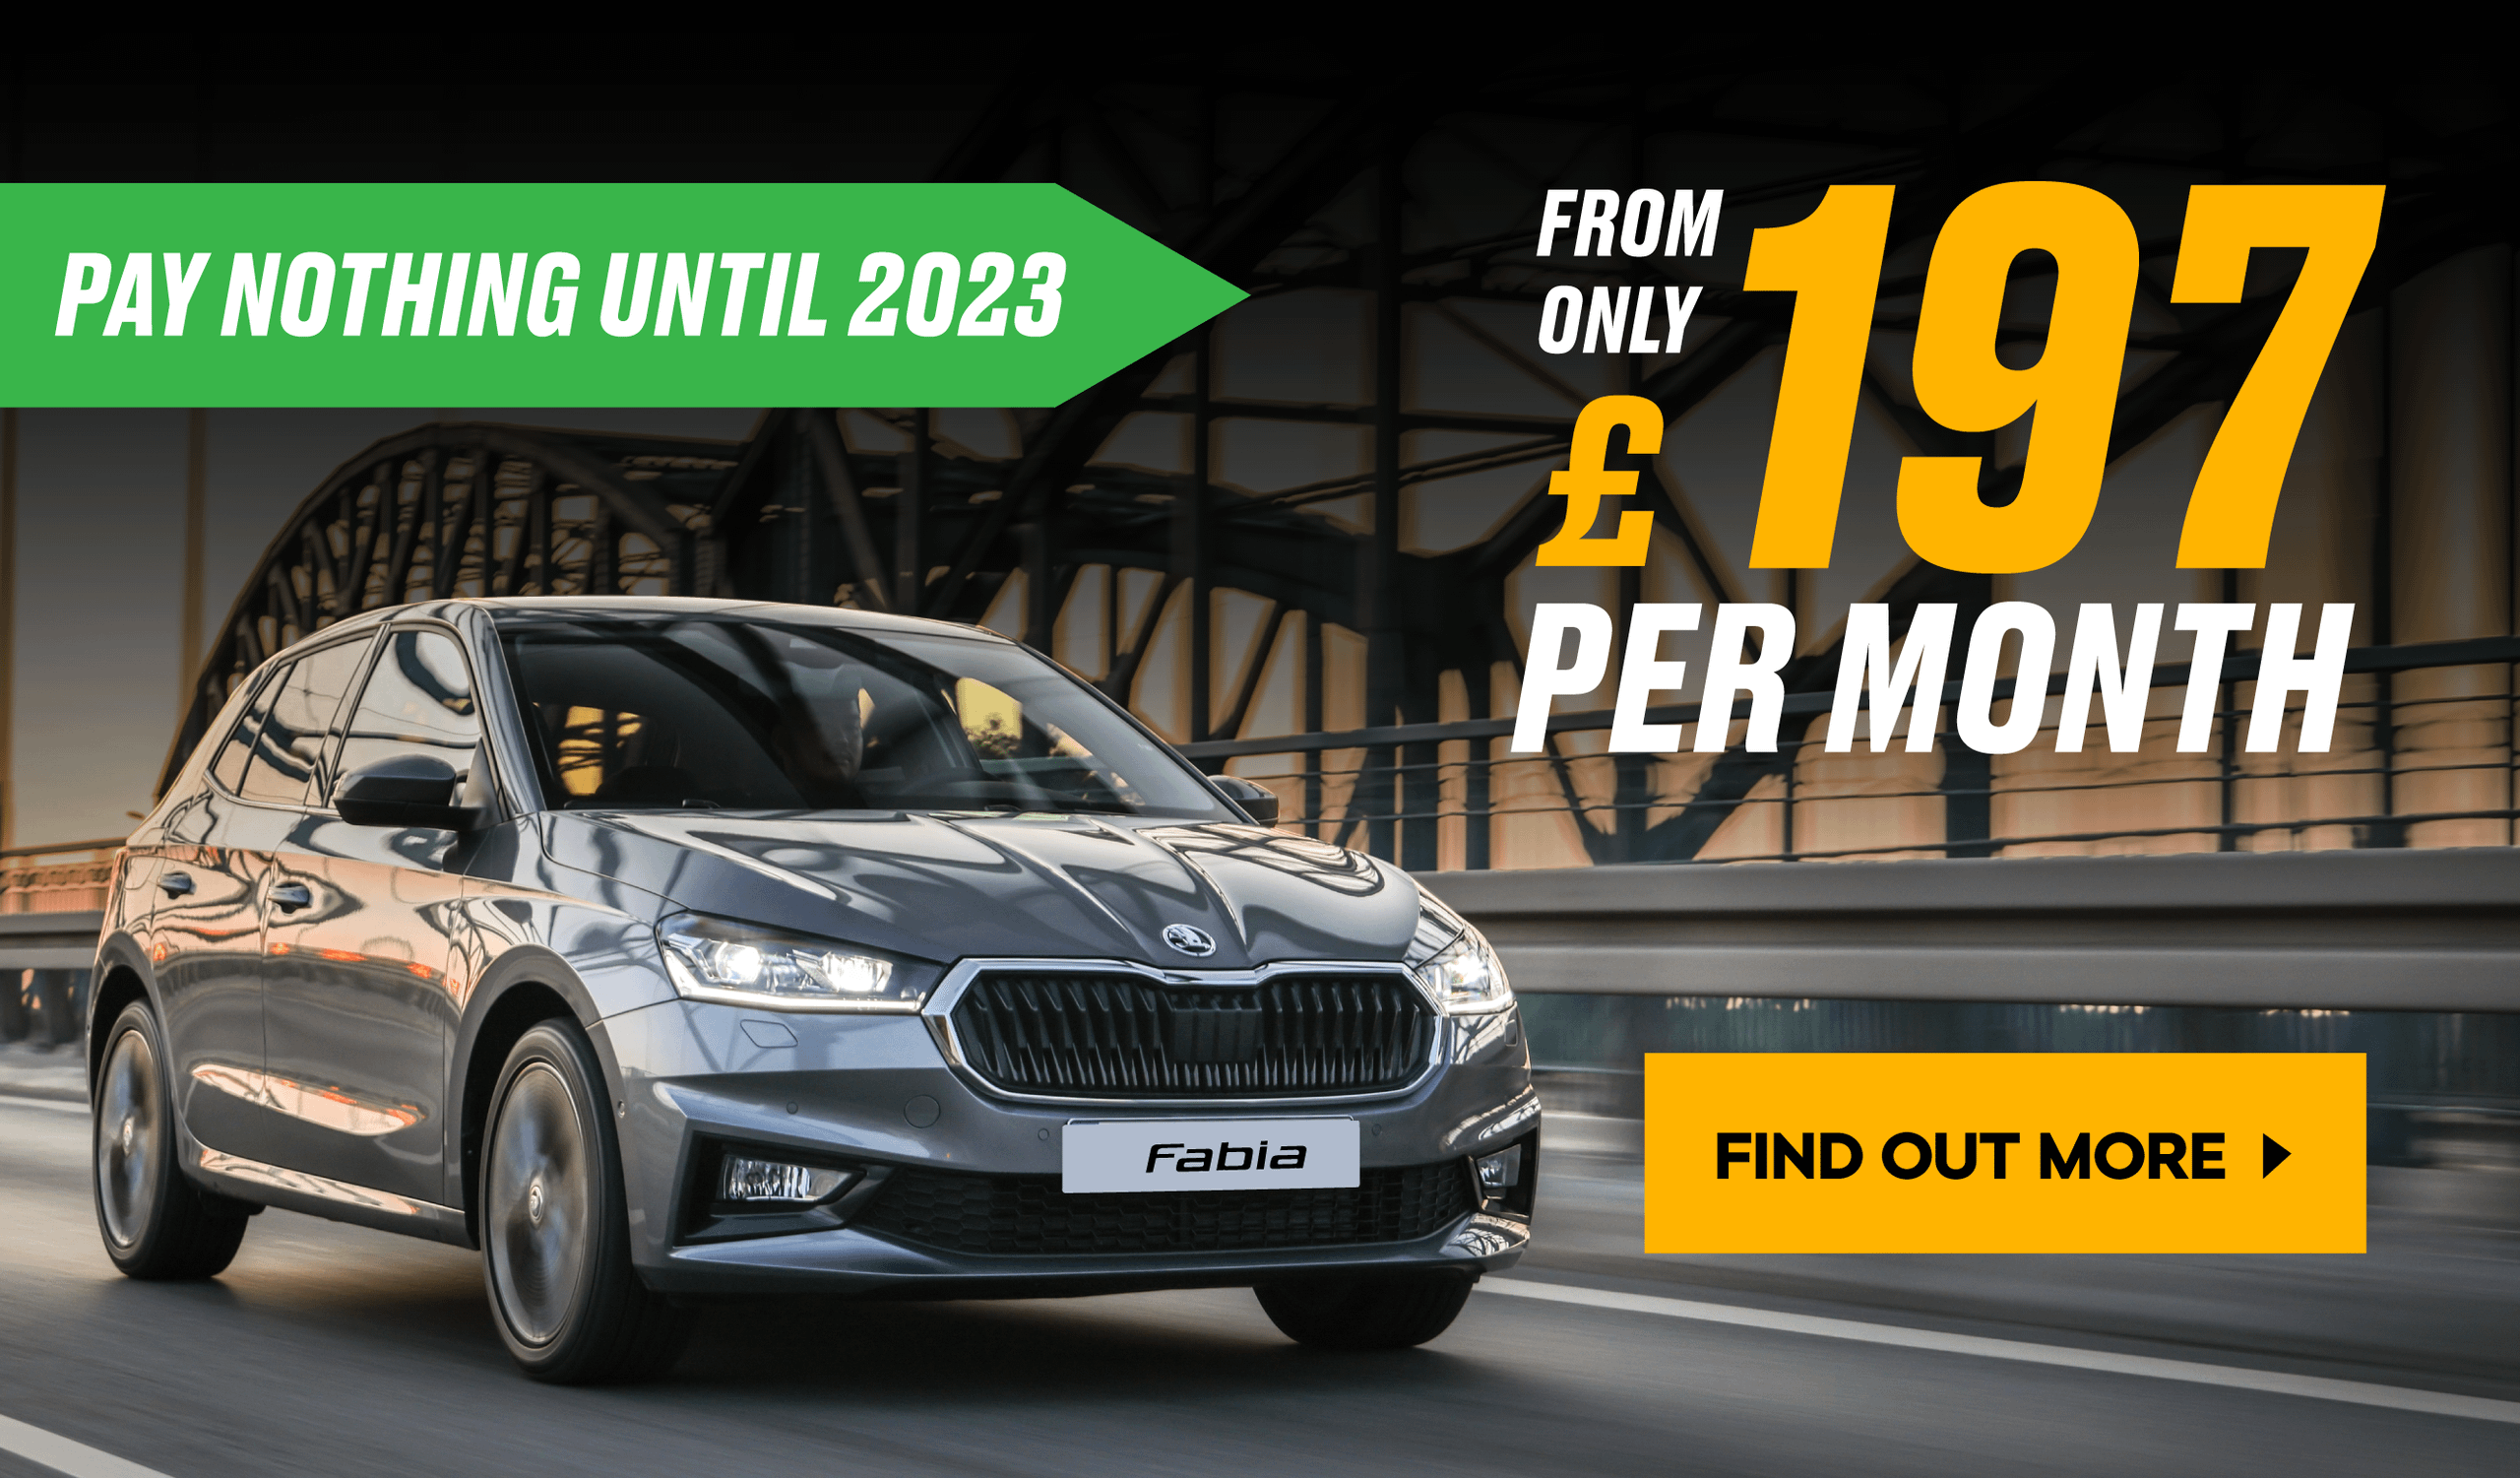 SKODA Fabia Offer - From £197 Per Month - Homepage Banner